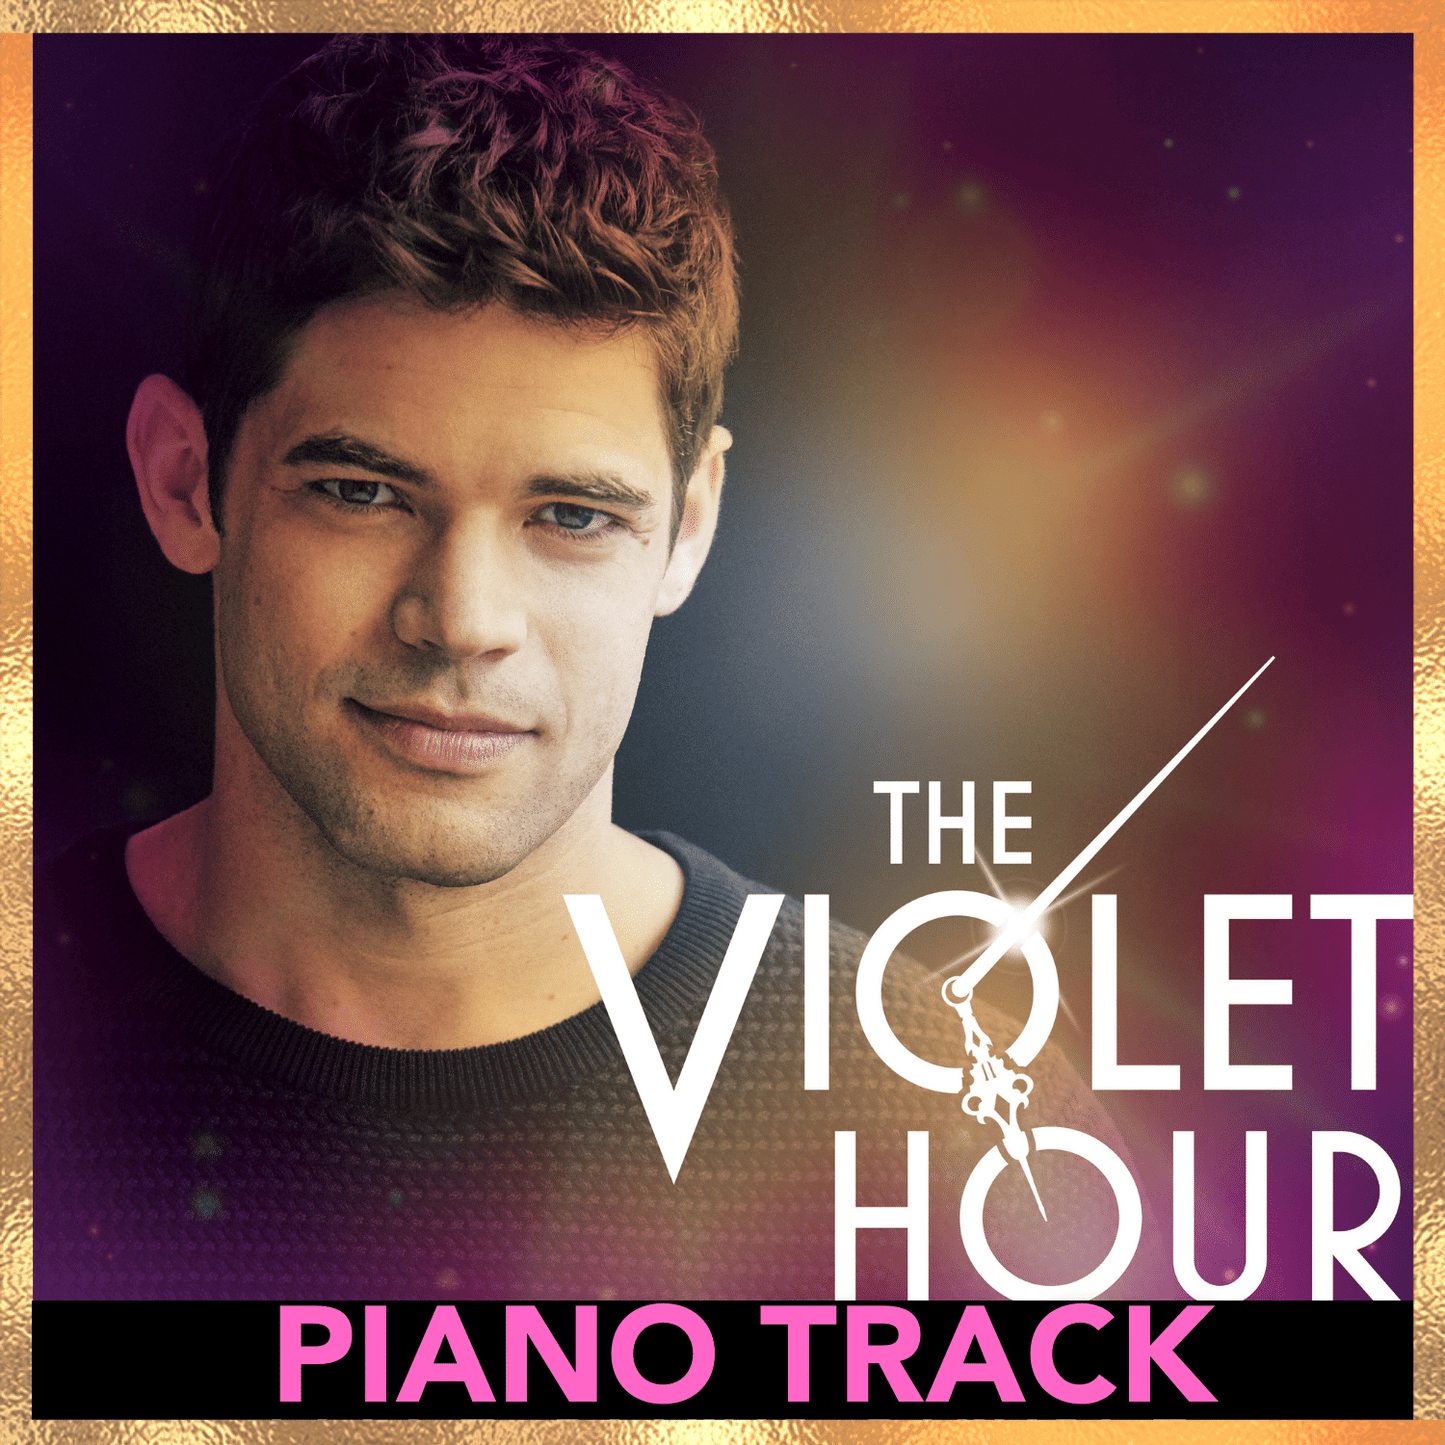 THE VIOLET HOUR (Piano Track)